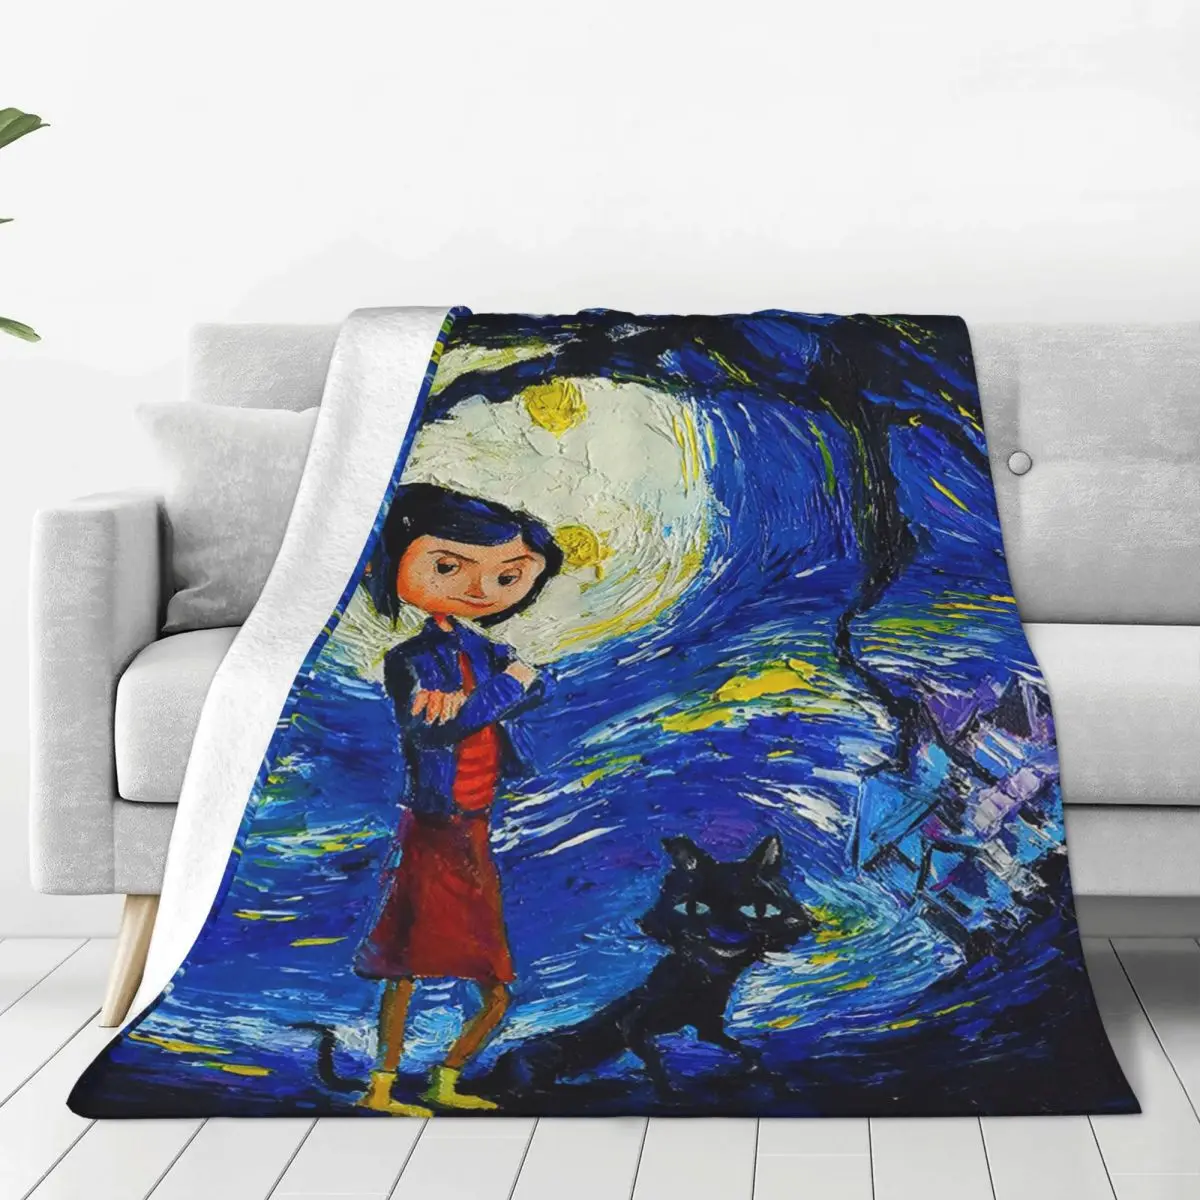 

Coraline Horror Girl Blankets Flannel The Starry Night Van Gogh Lightweight Thin Throw Blankets for Car Sofa Couch Bedspread